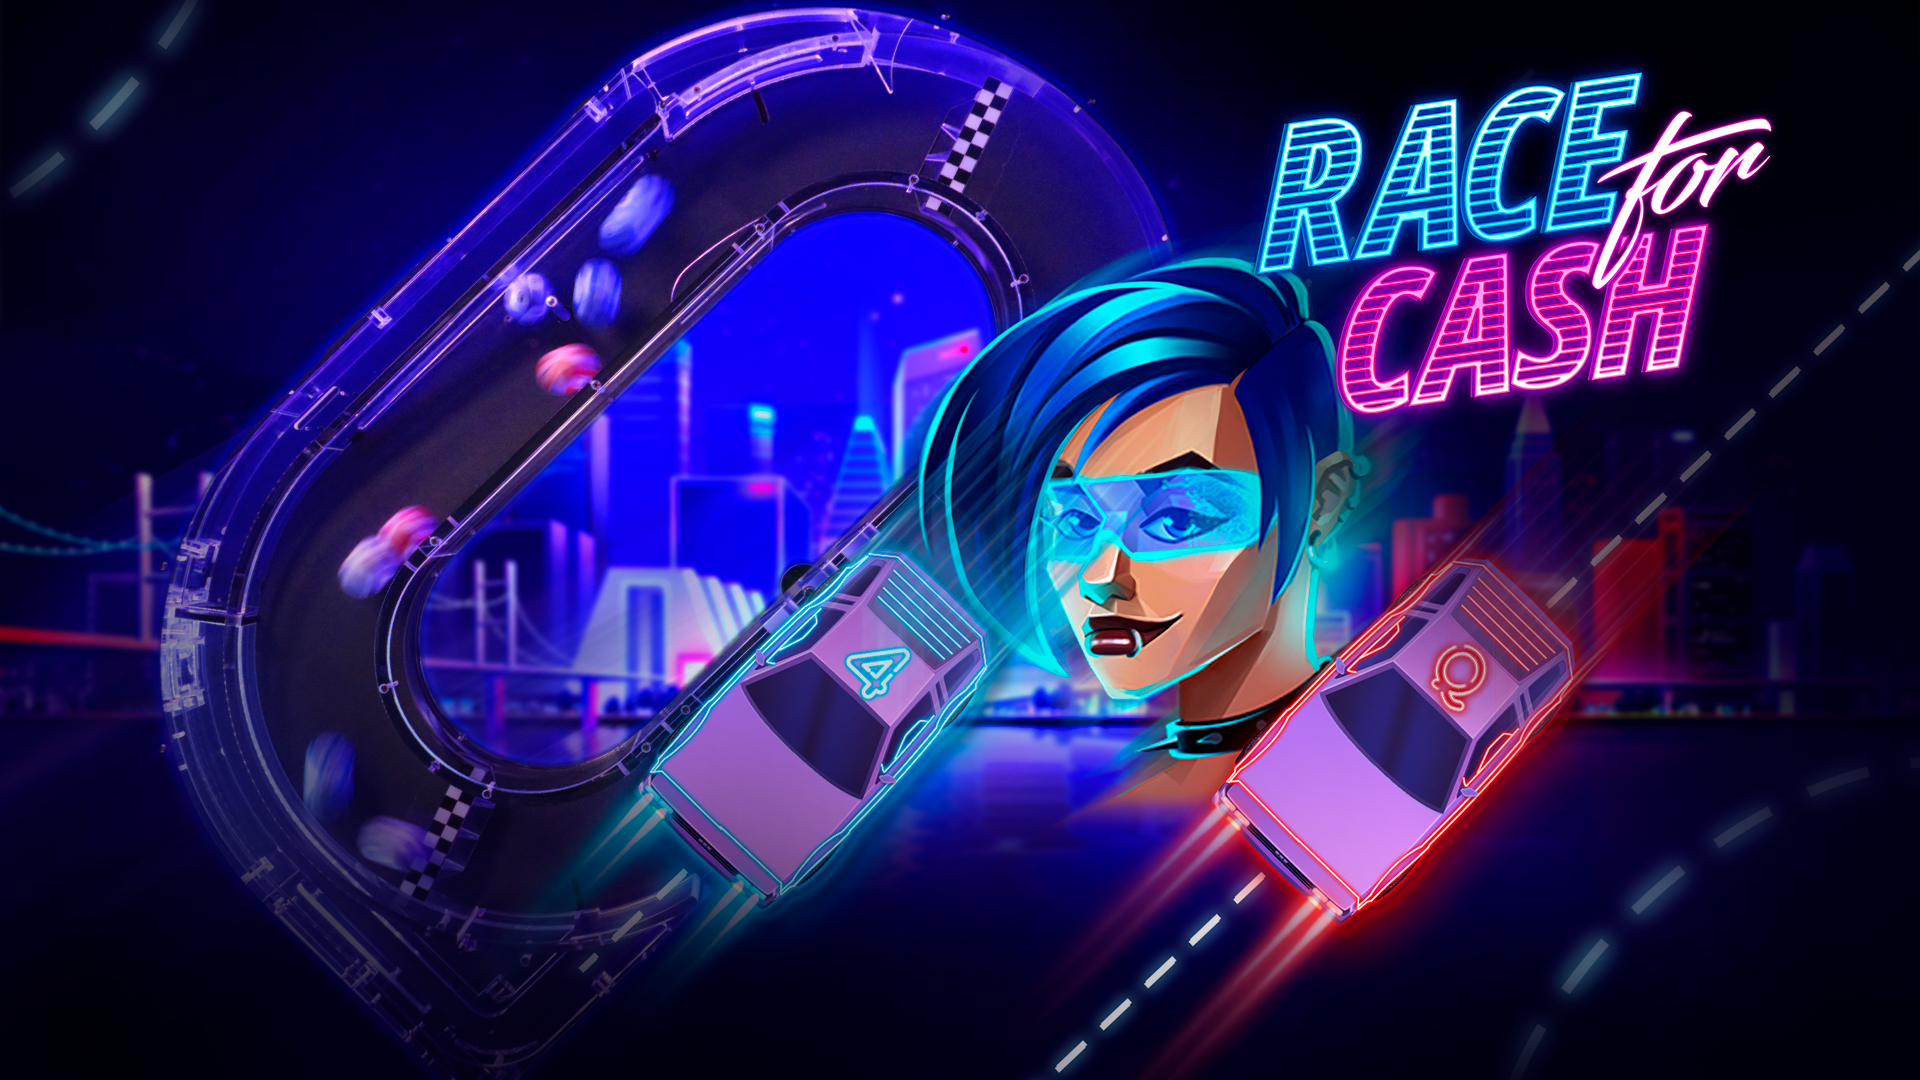 Fasten your seatbelts, Race for Cash: Live and Single Player is here!